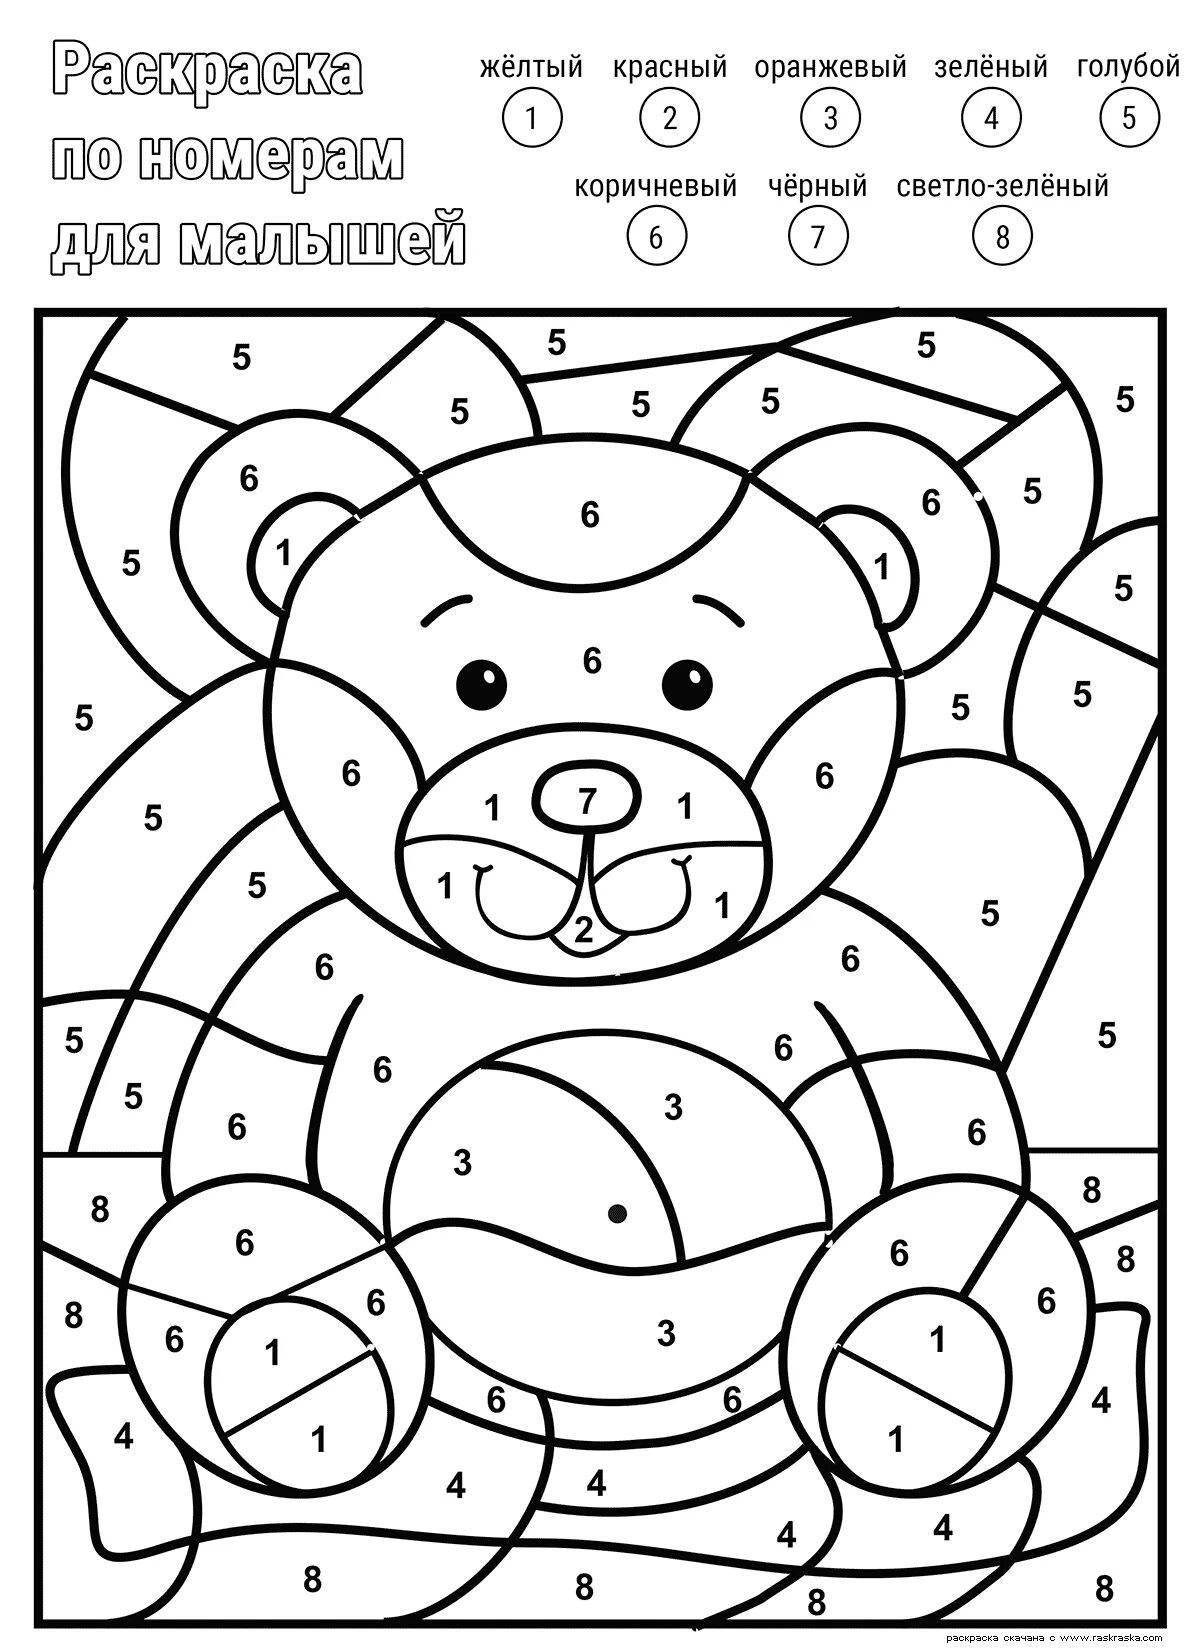 Fun coloring book with small numbers